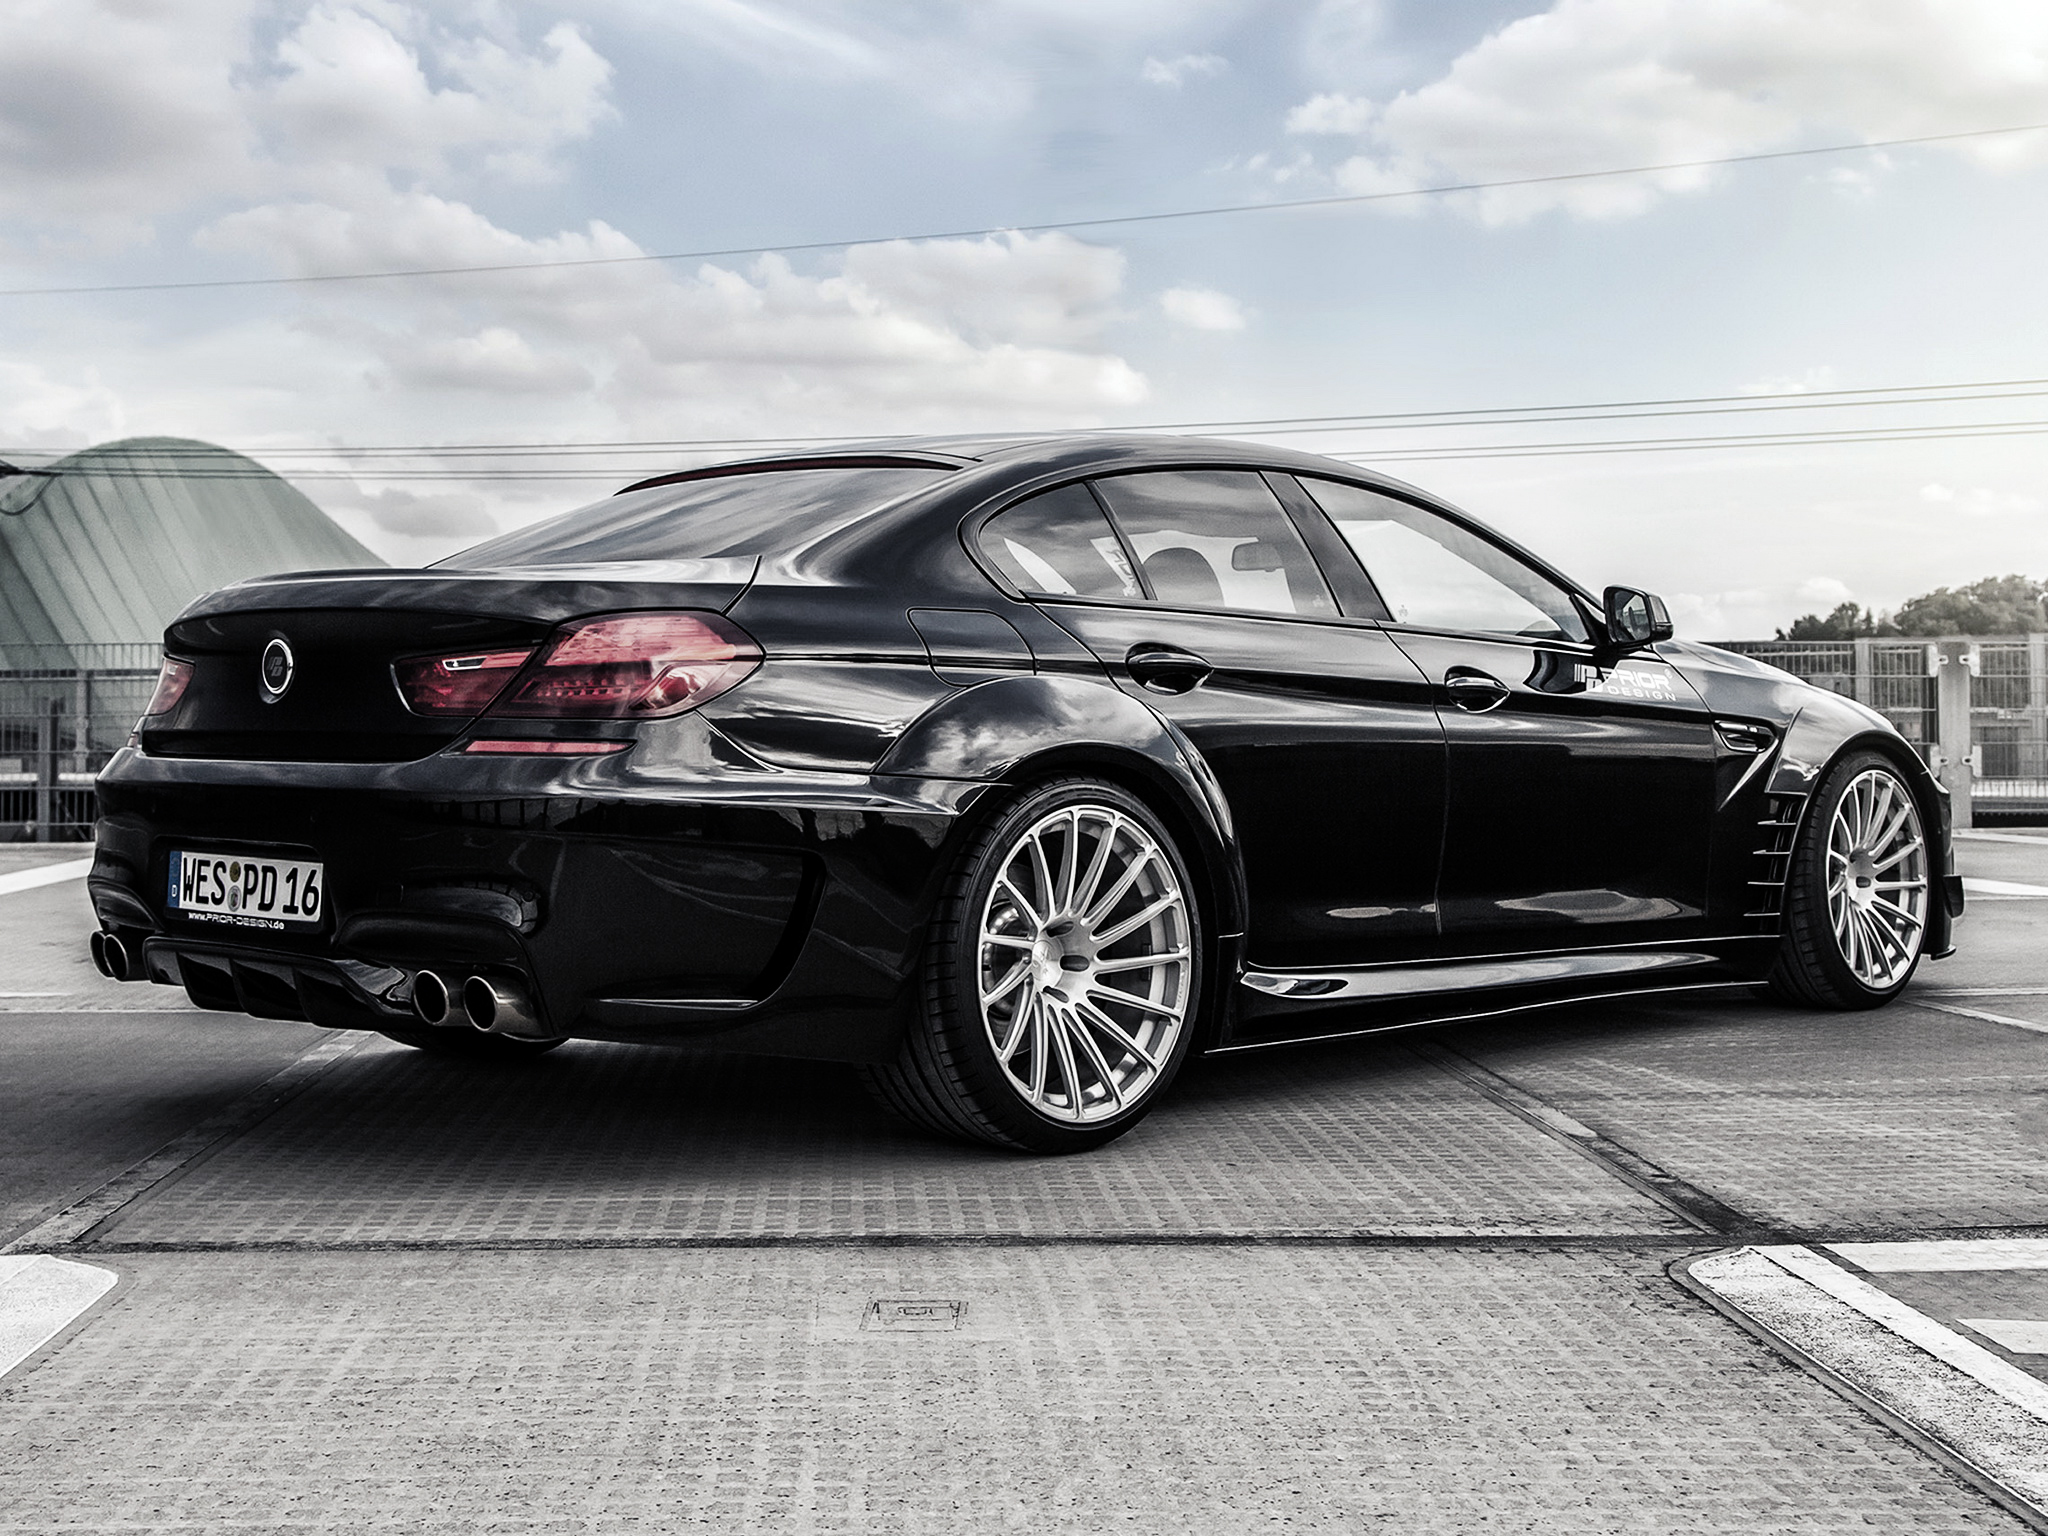 BMW M6 Wallpaper, Picture, Image